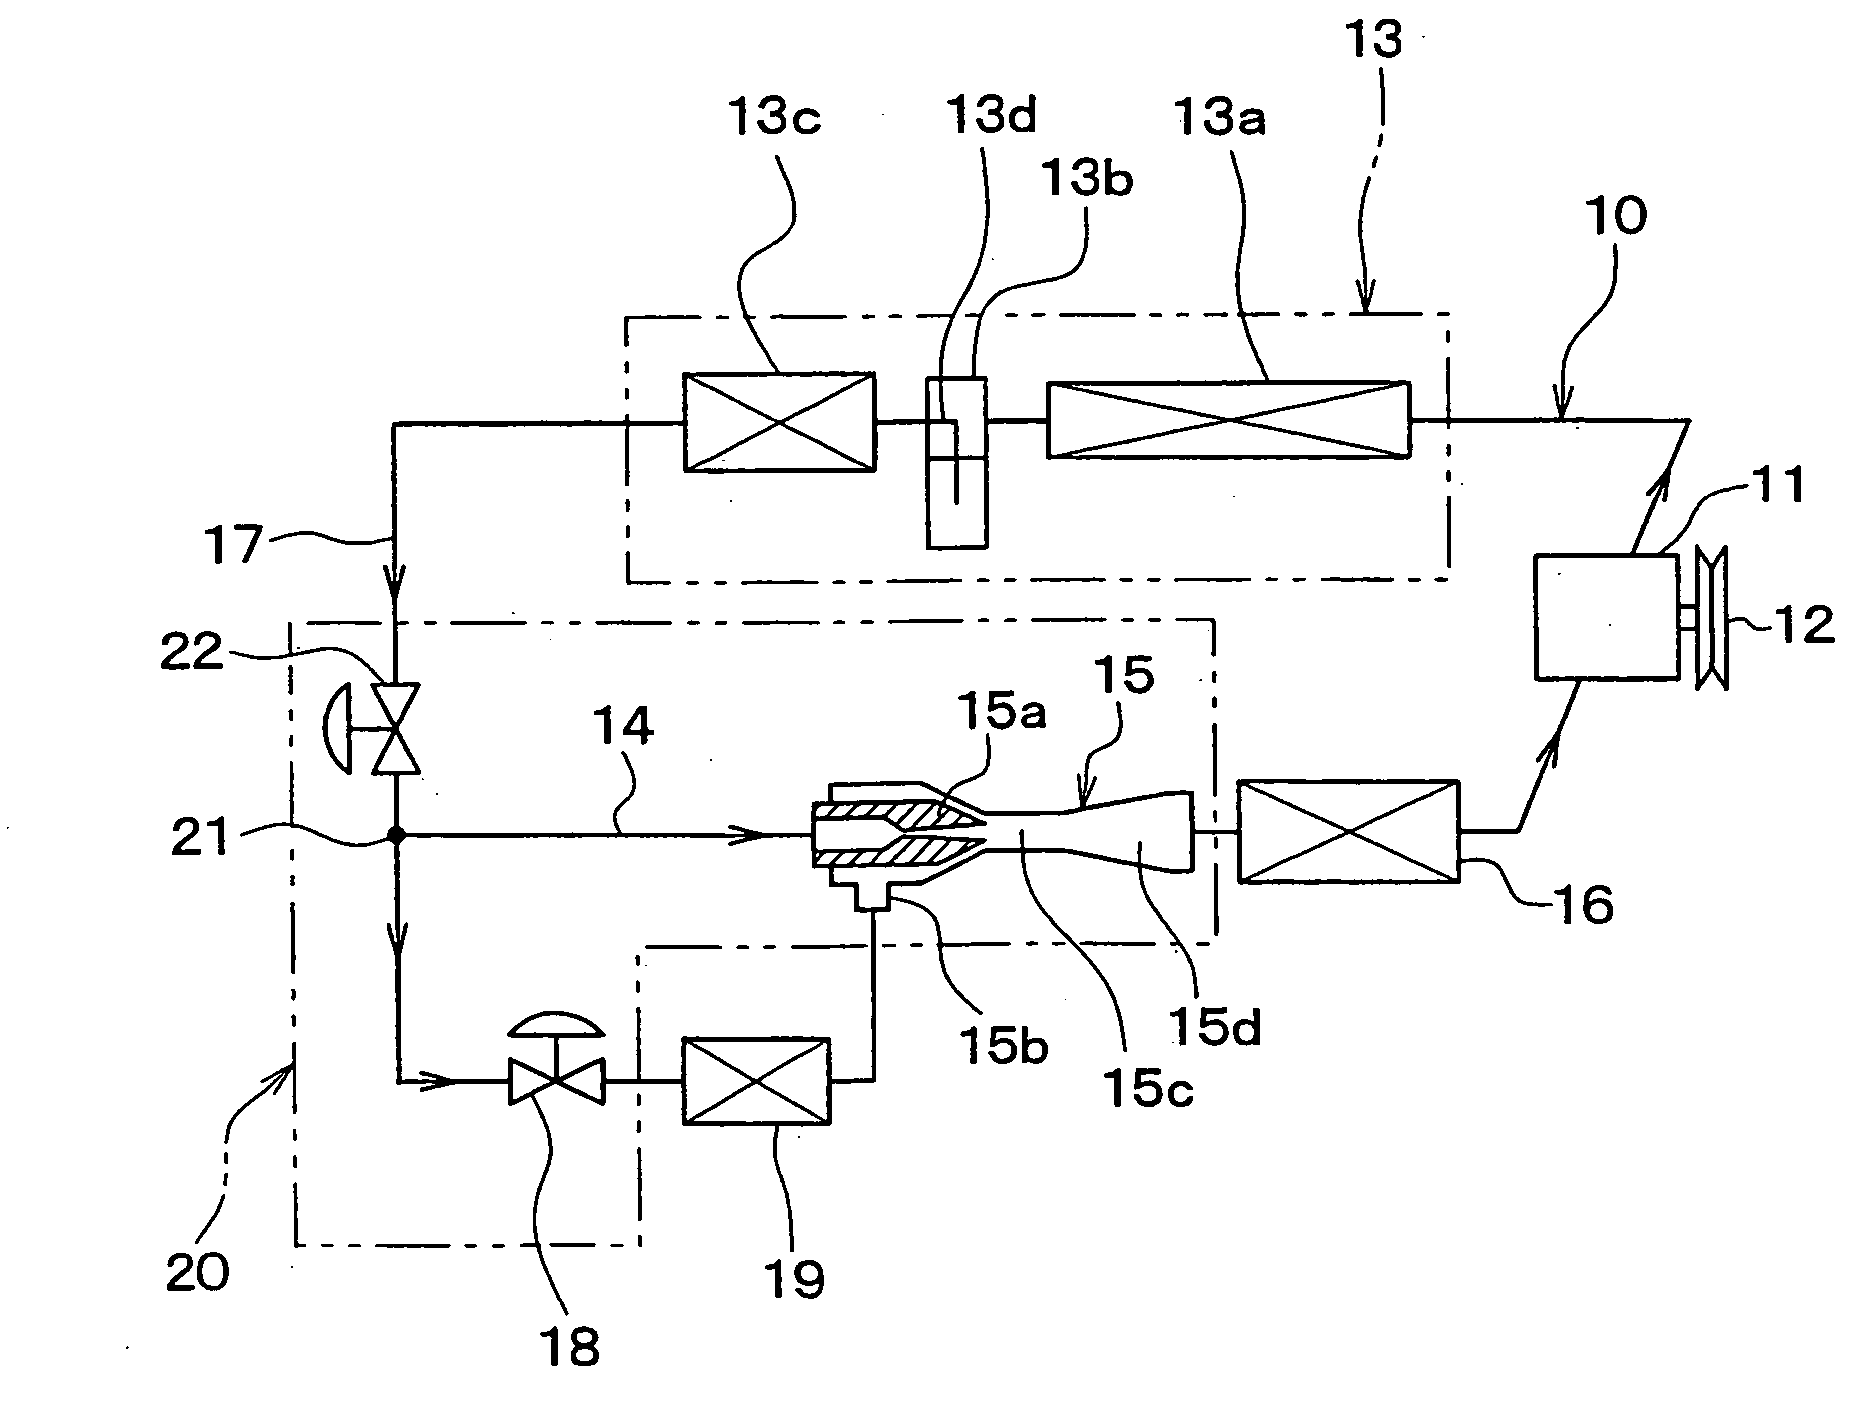 Refrigerant cycle device with ejector